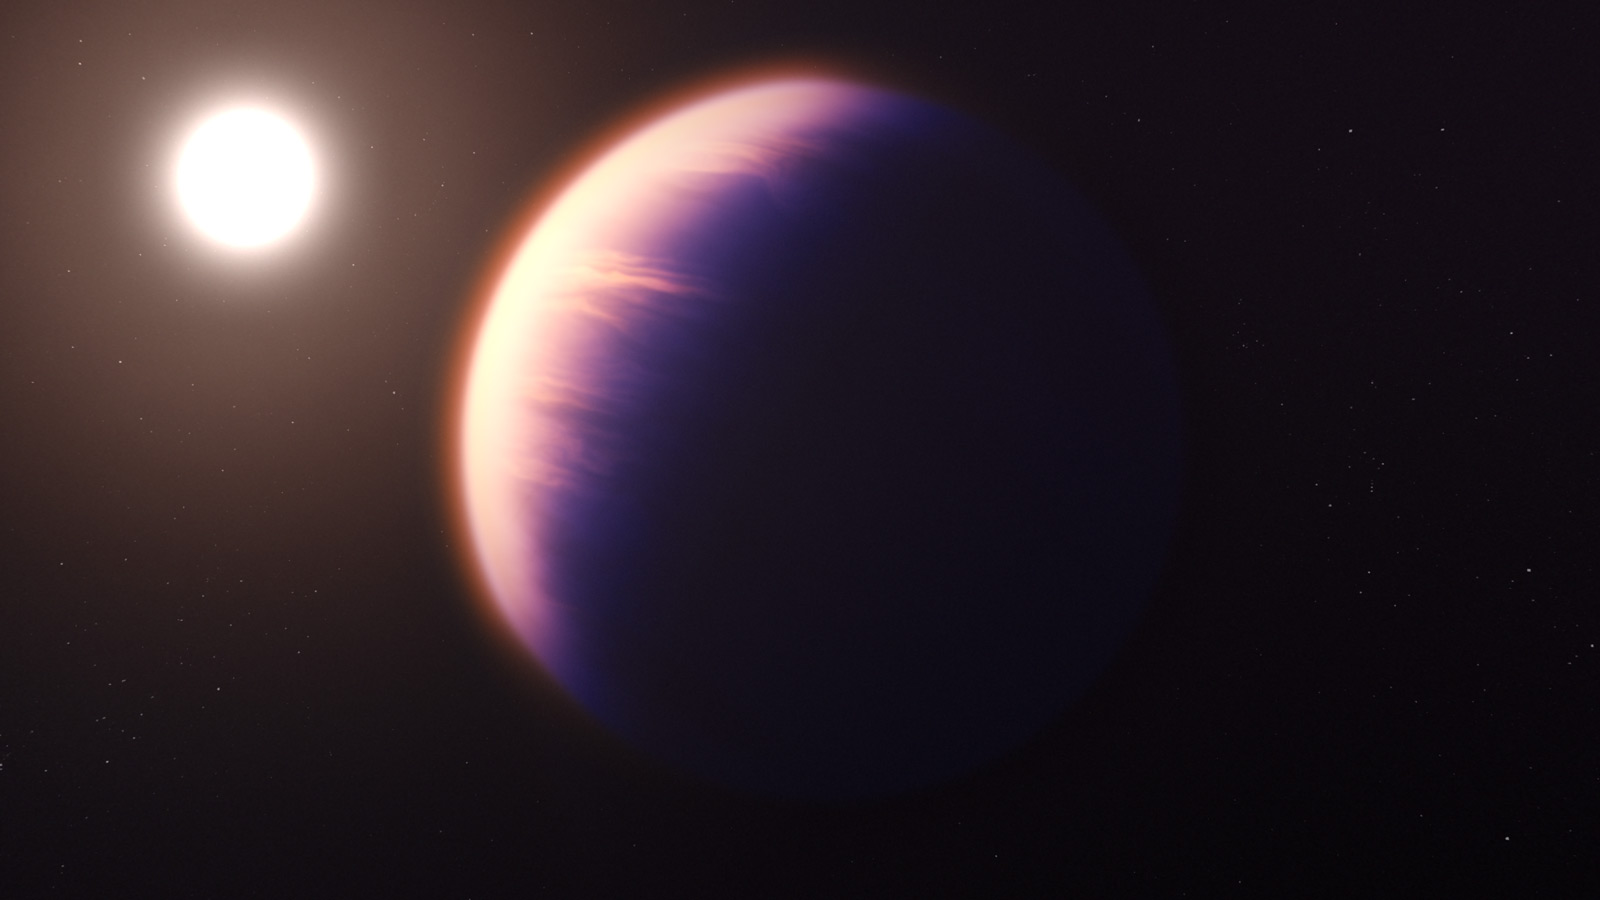 slide 4 - An artist's rendering of a large gas giant exoplanet orbiting a yellow star in the distance.